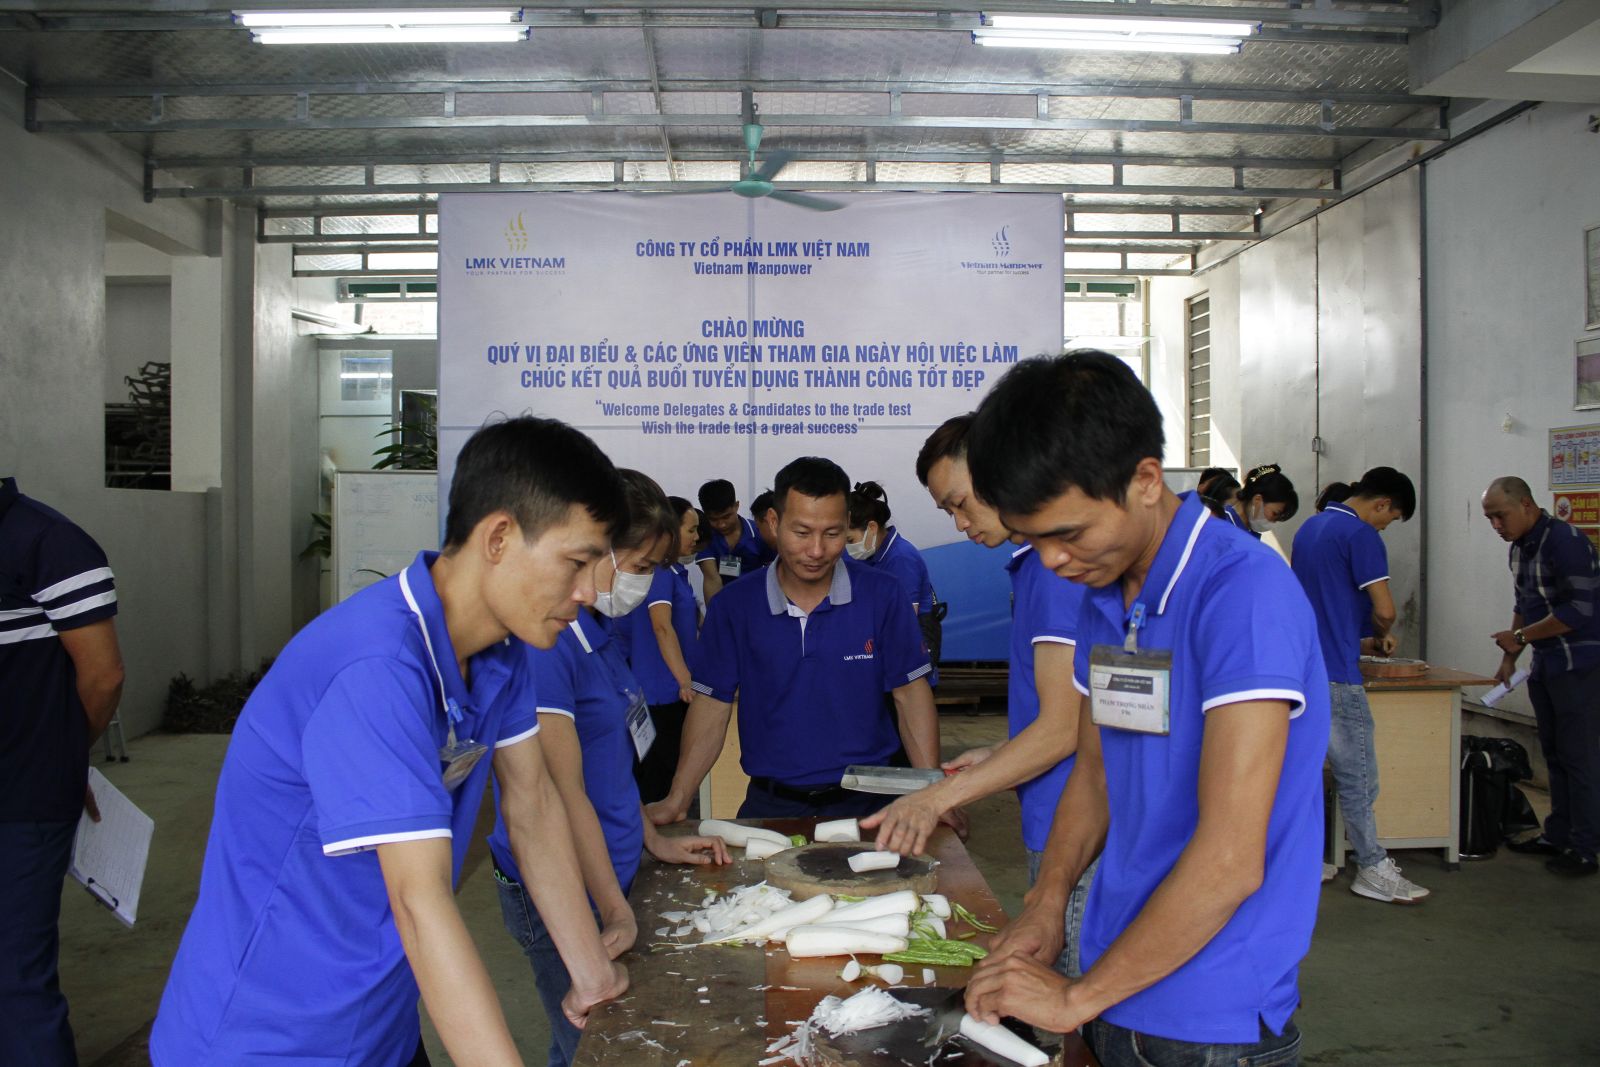 Vietnam Manpower provides food processing workers to work in Romania